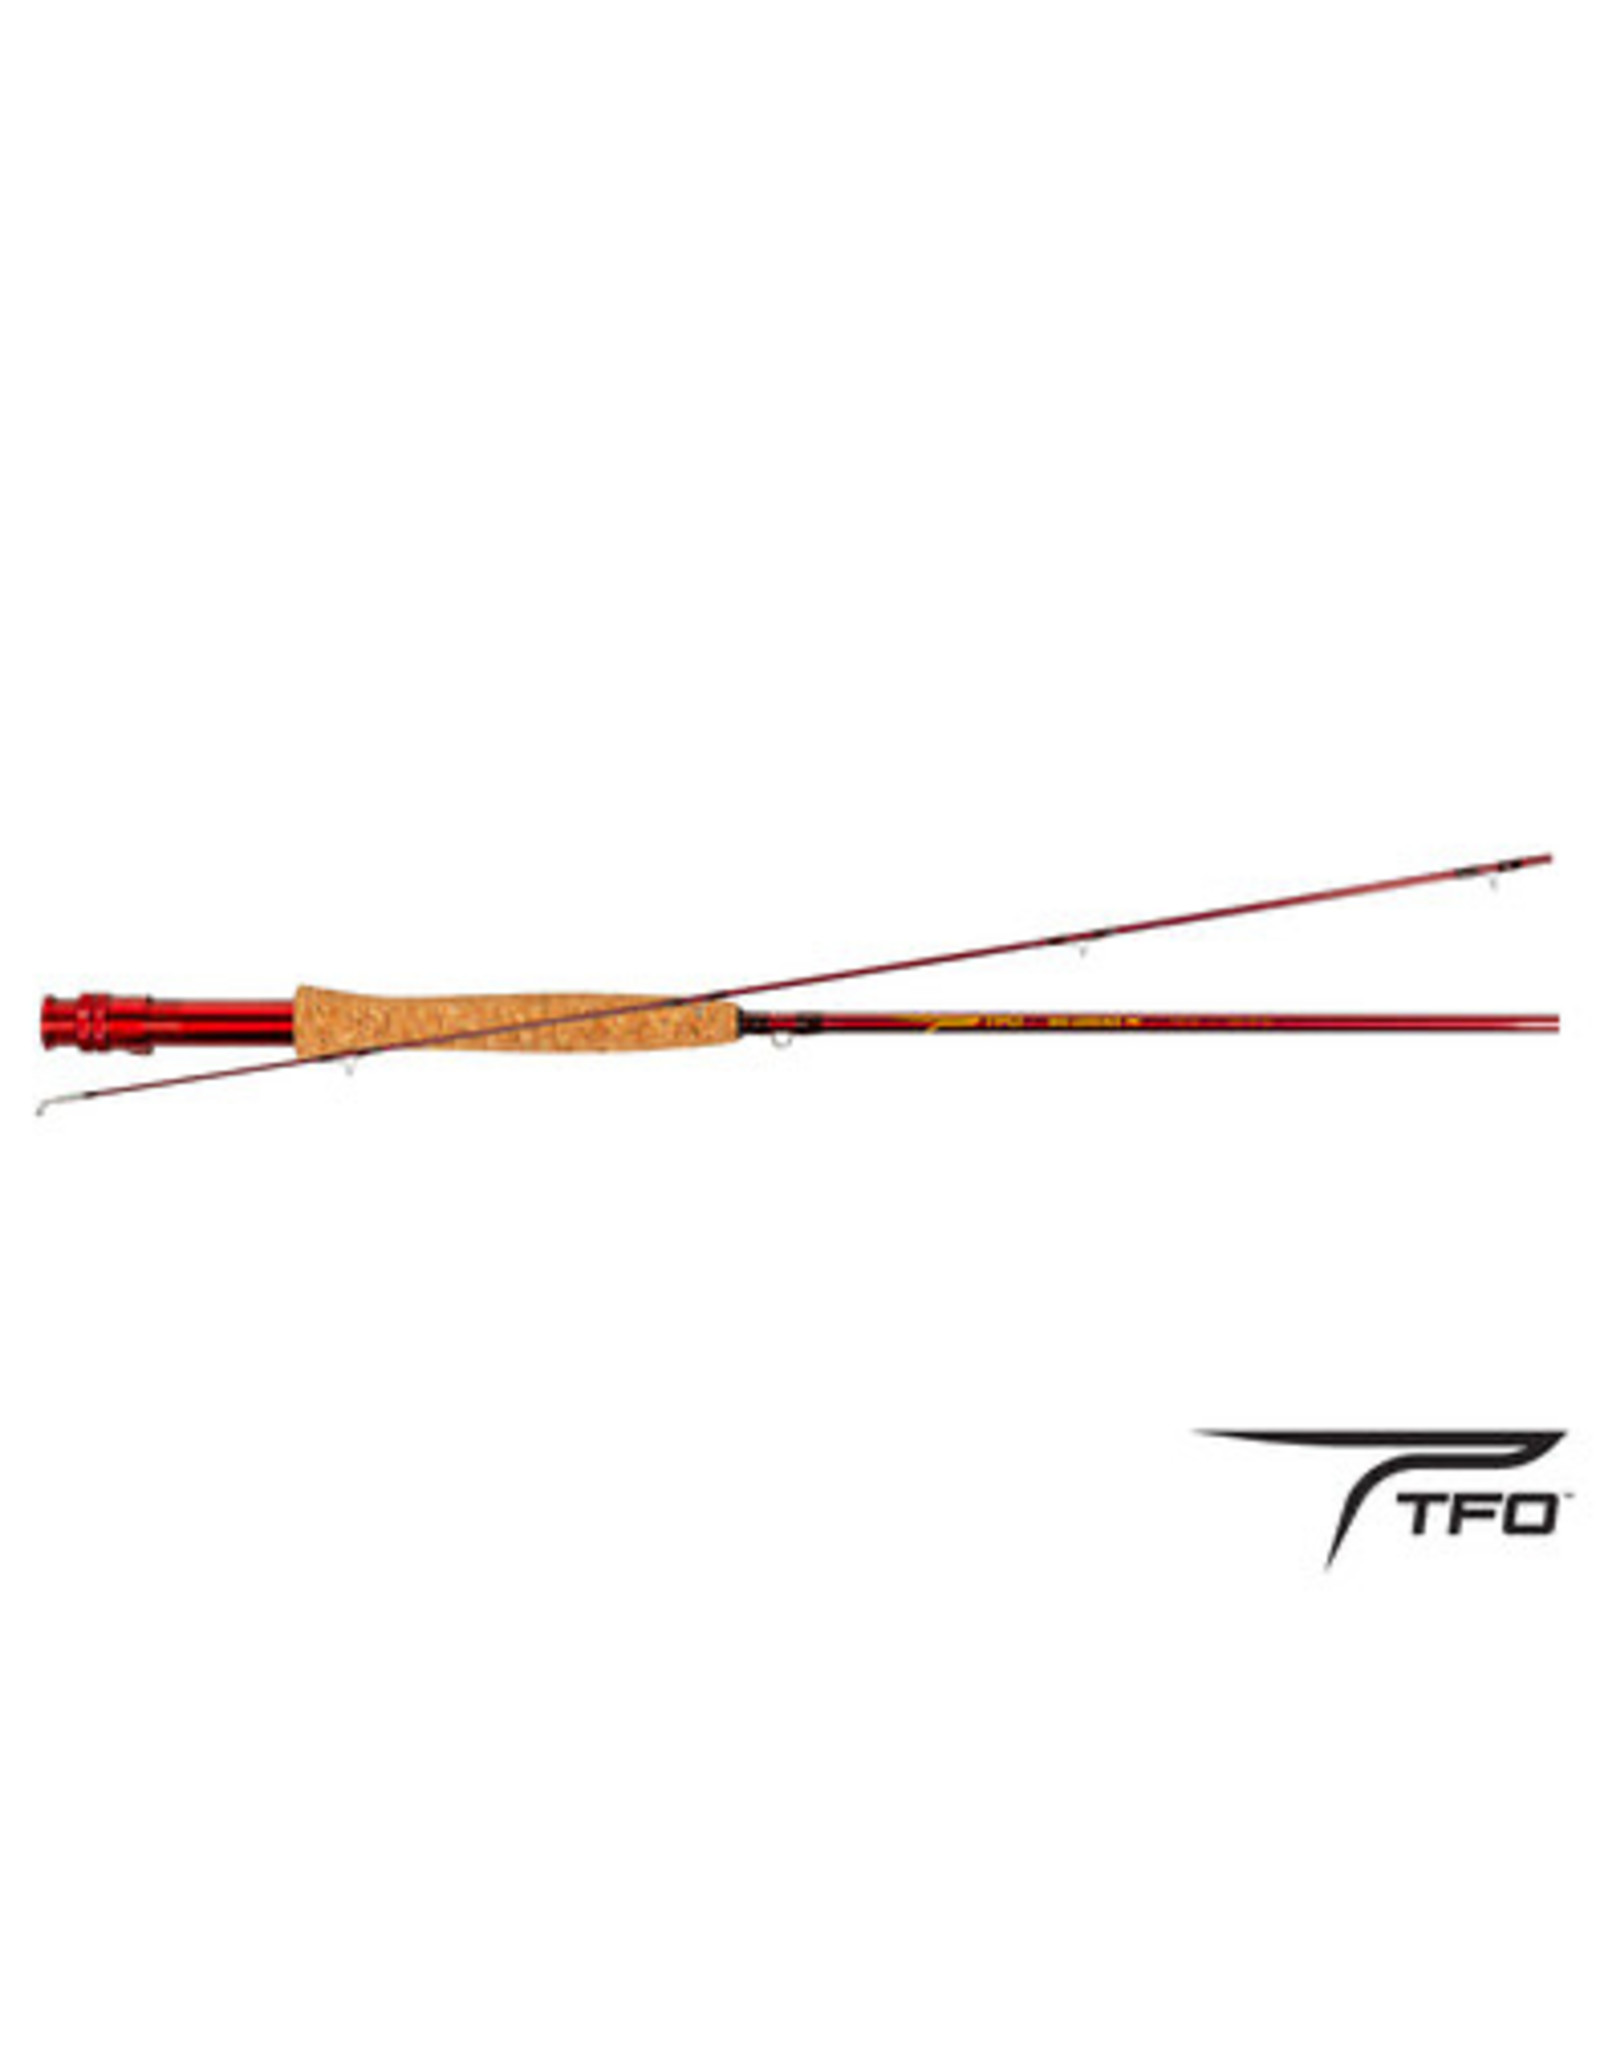 Temple Fork Outfitters Canada TFO Bug Launcher Rod